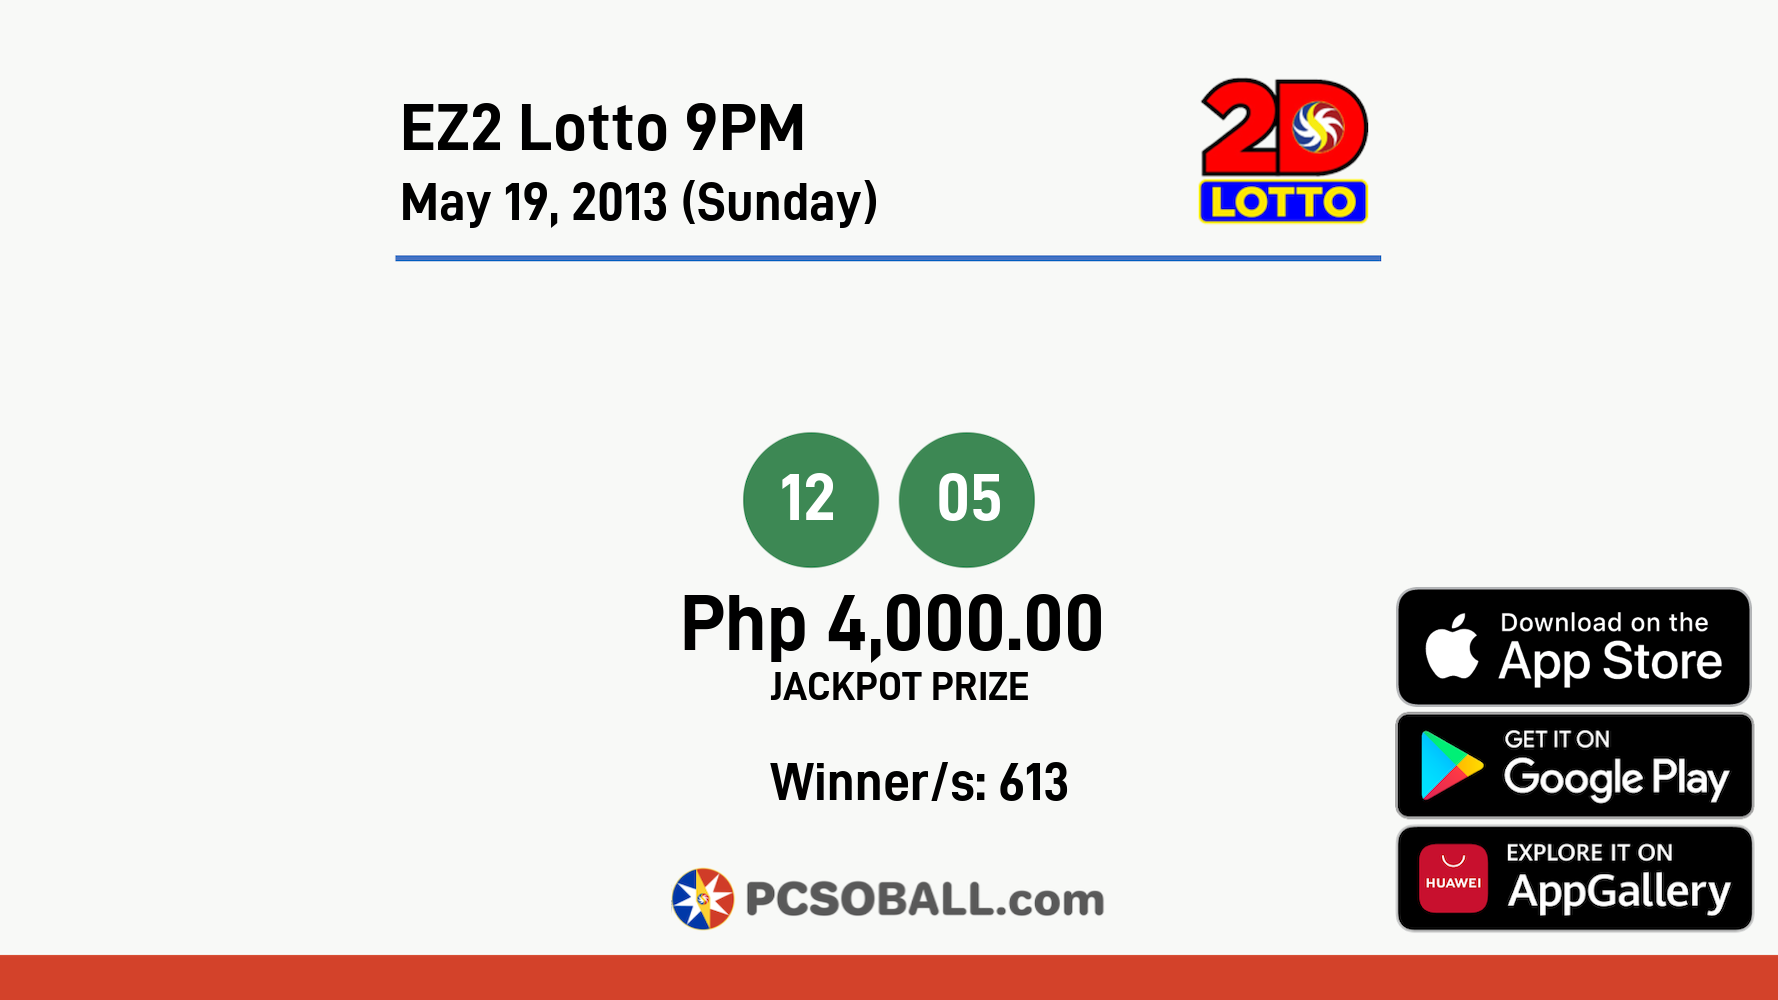 EZ2 Lotto 9PM May 19, 2013 (Sunday) Result